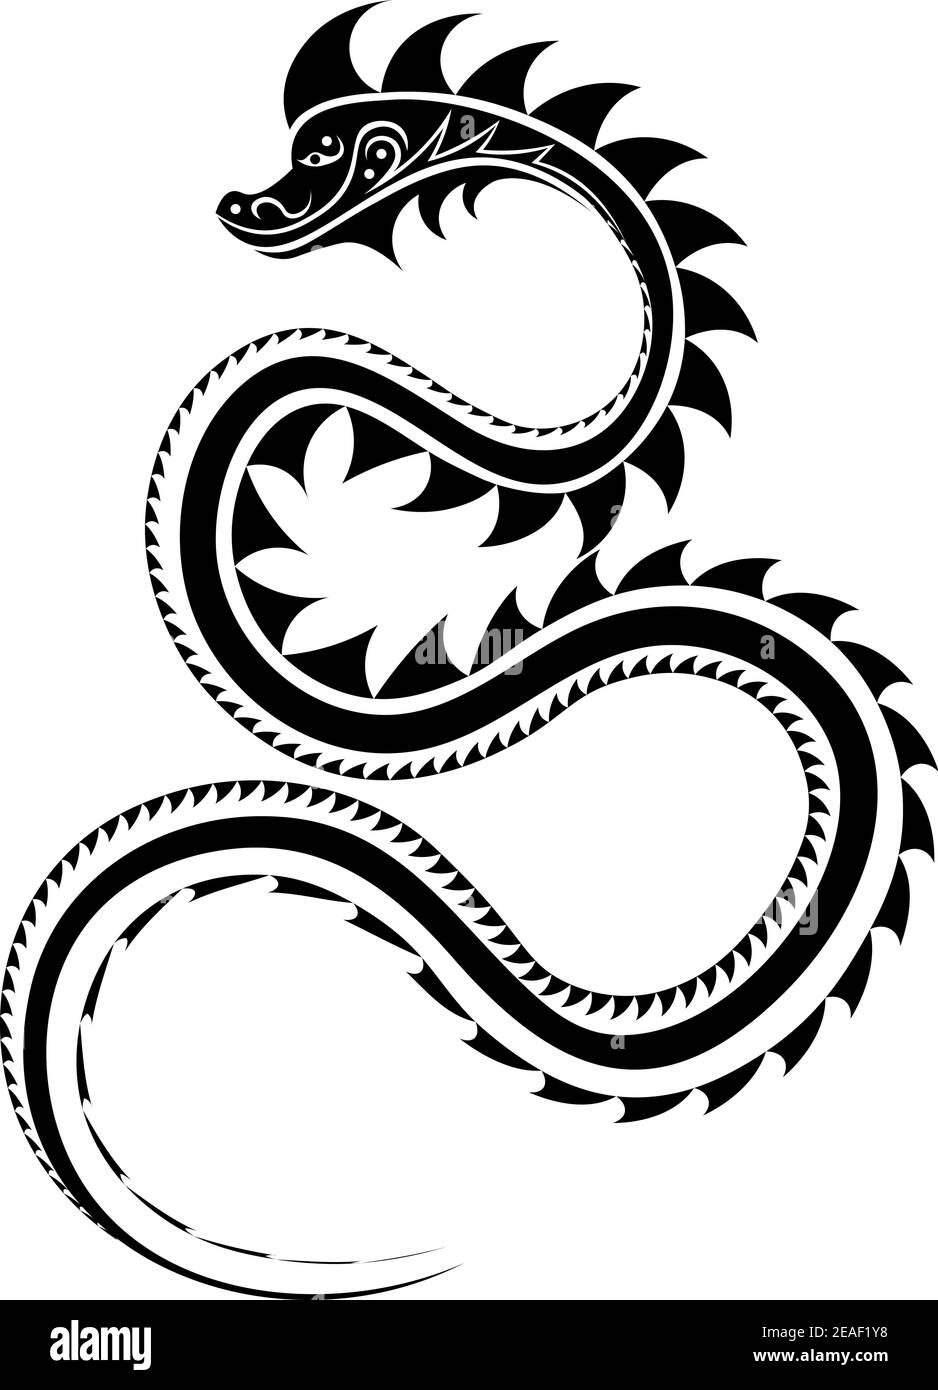 isolated abstract black dragon or serpent in folk tribal style Stock Vector